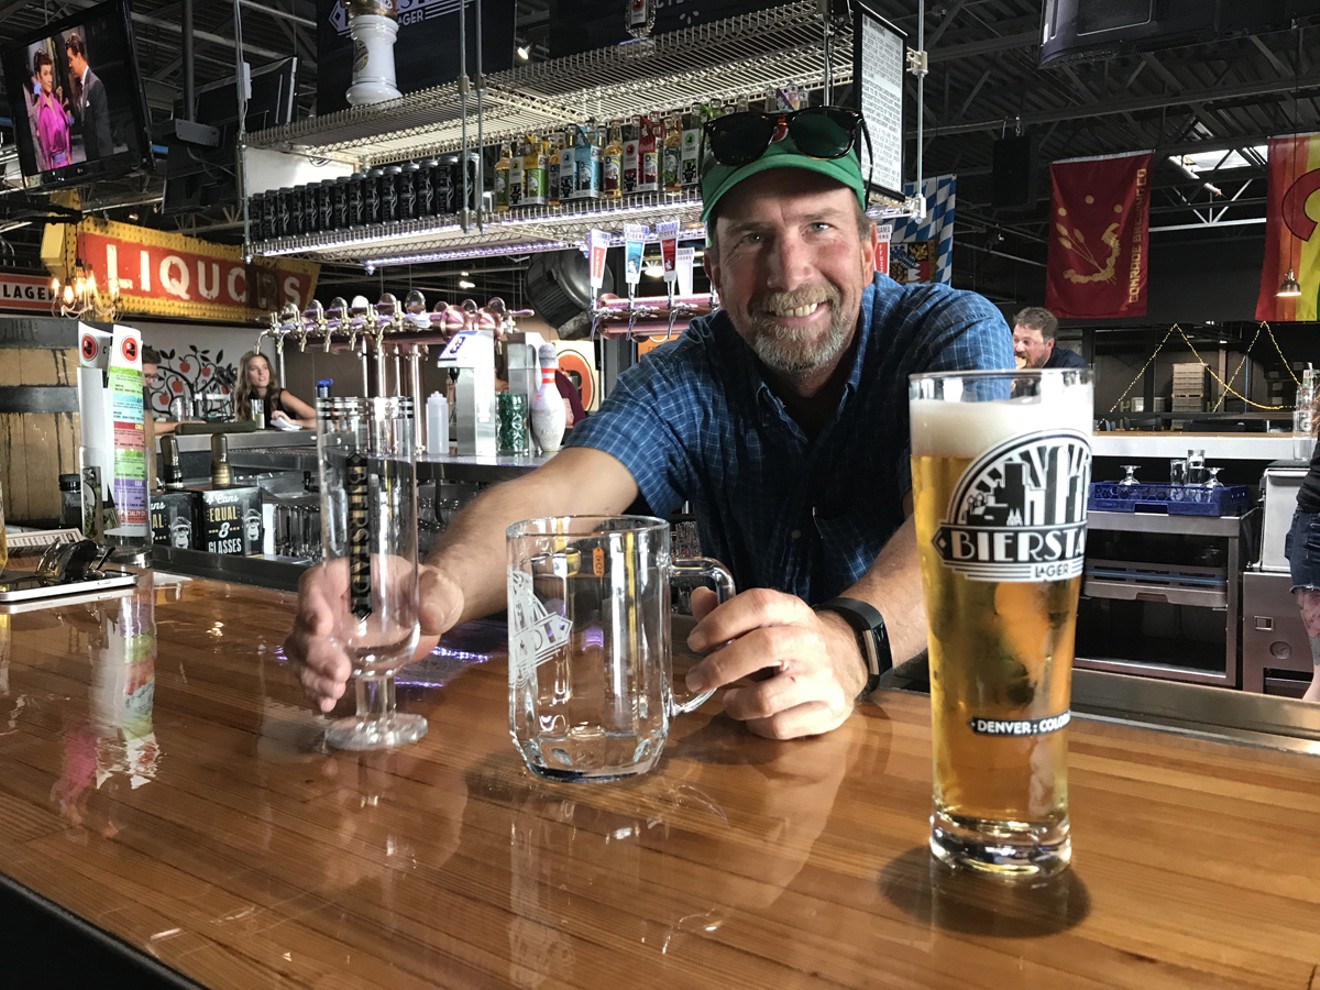 Bierstadt’s Gary Valliere makes sure every account uses the right glassware.